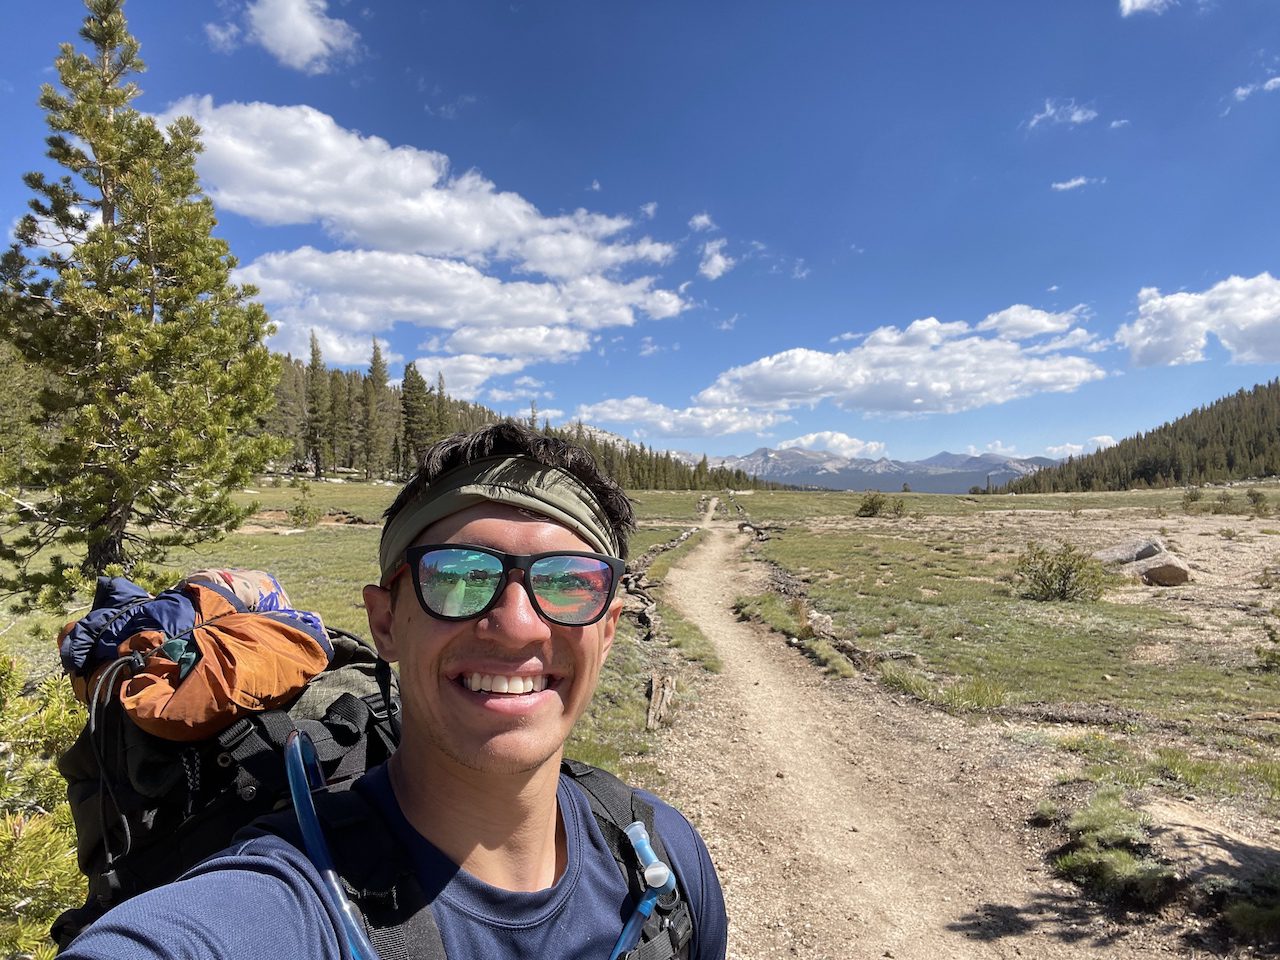 Is Backpacking Worth It? When To Backpack Vs. Car Camp